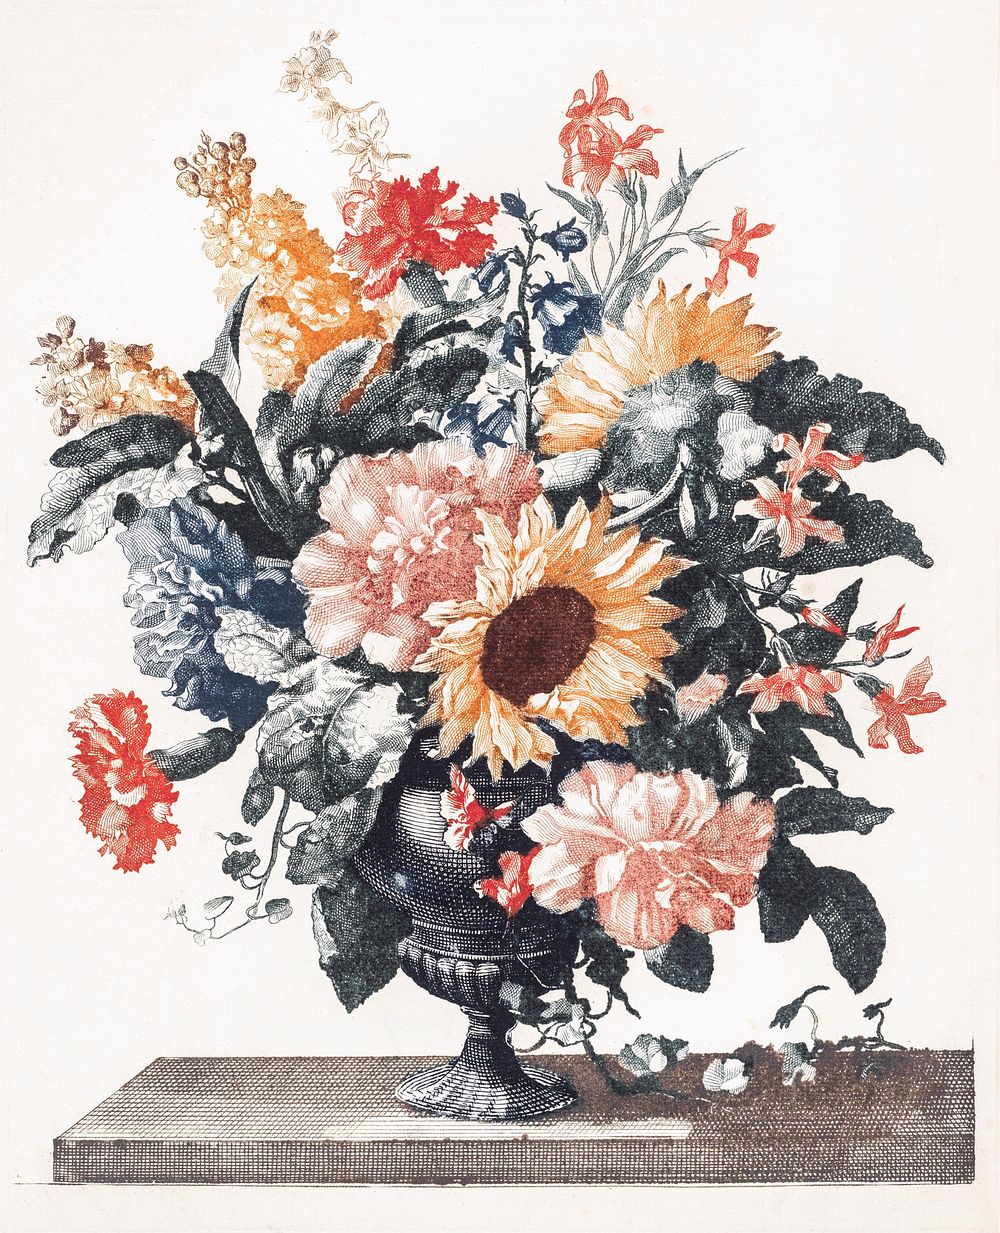 Stone Vase With Sunflowers and Carnations (1688-1698) by Johan Teyler (1648-1709). Original from The Rijksmuseum. Digitally…